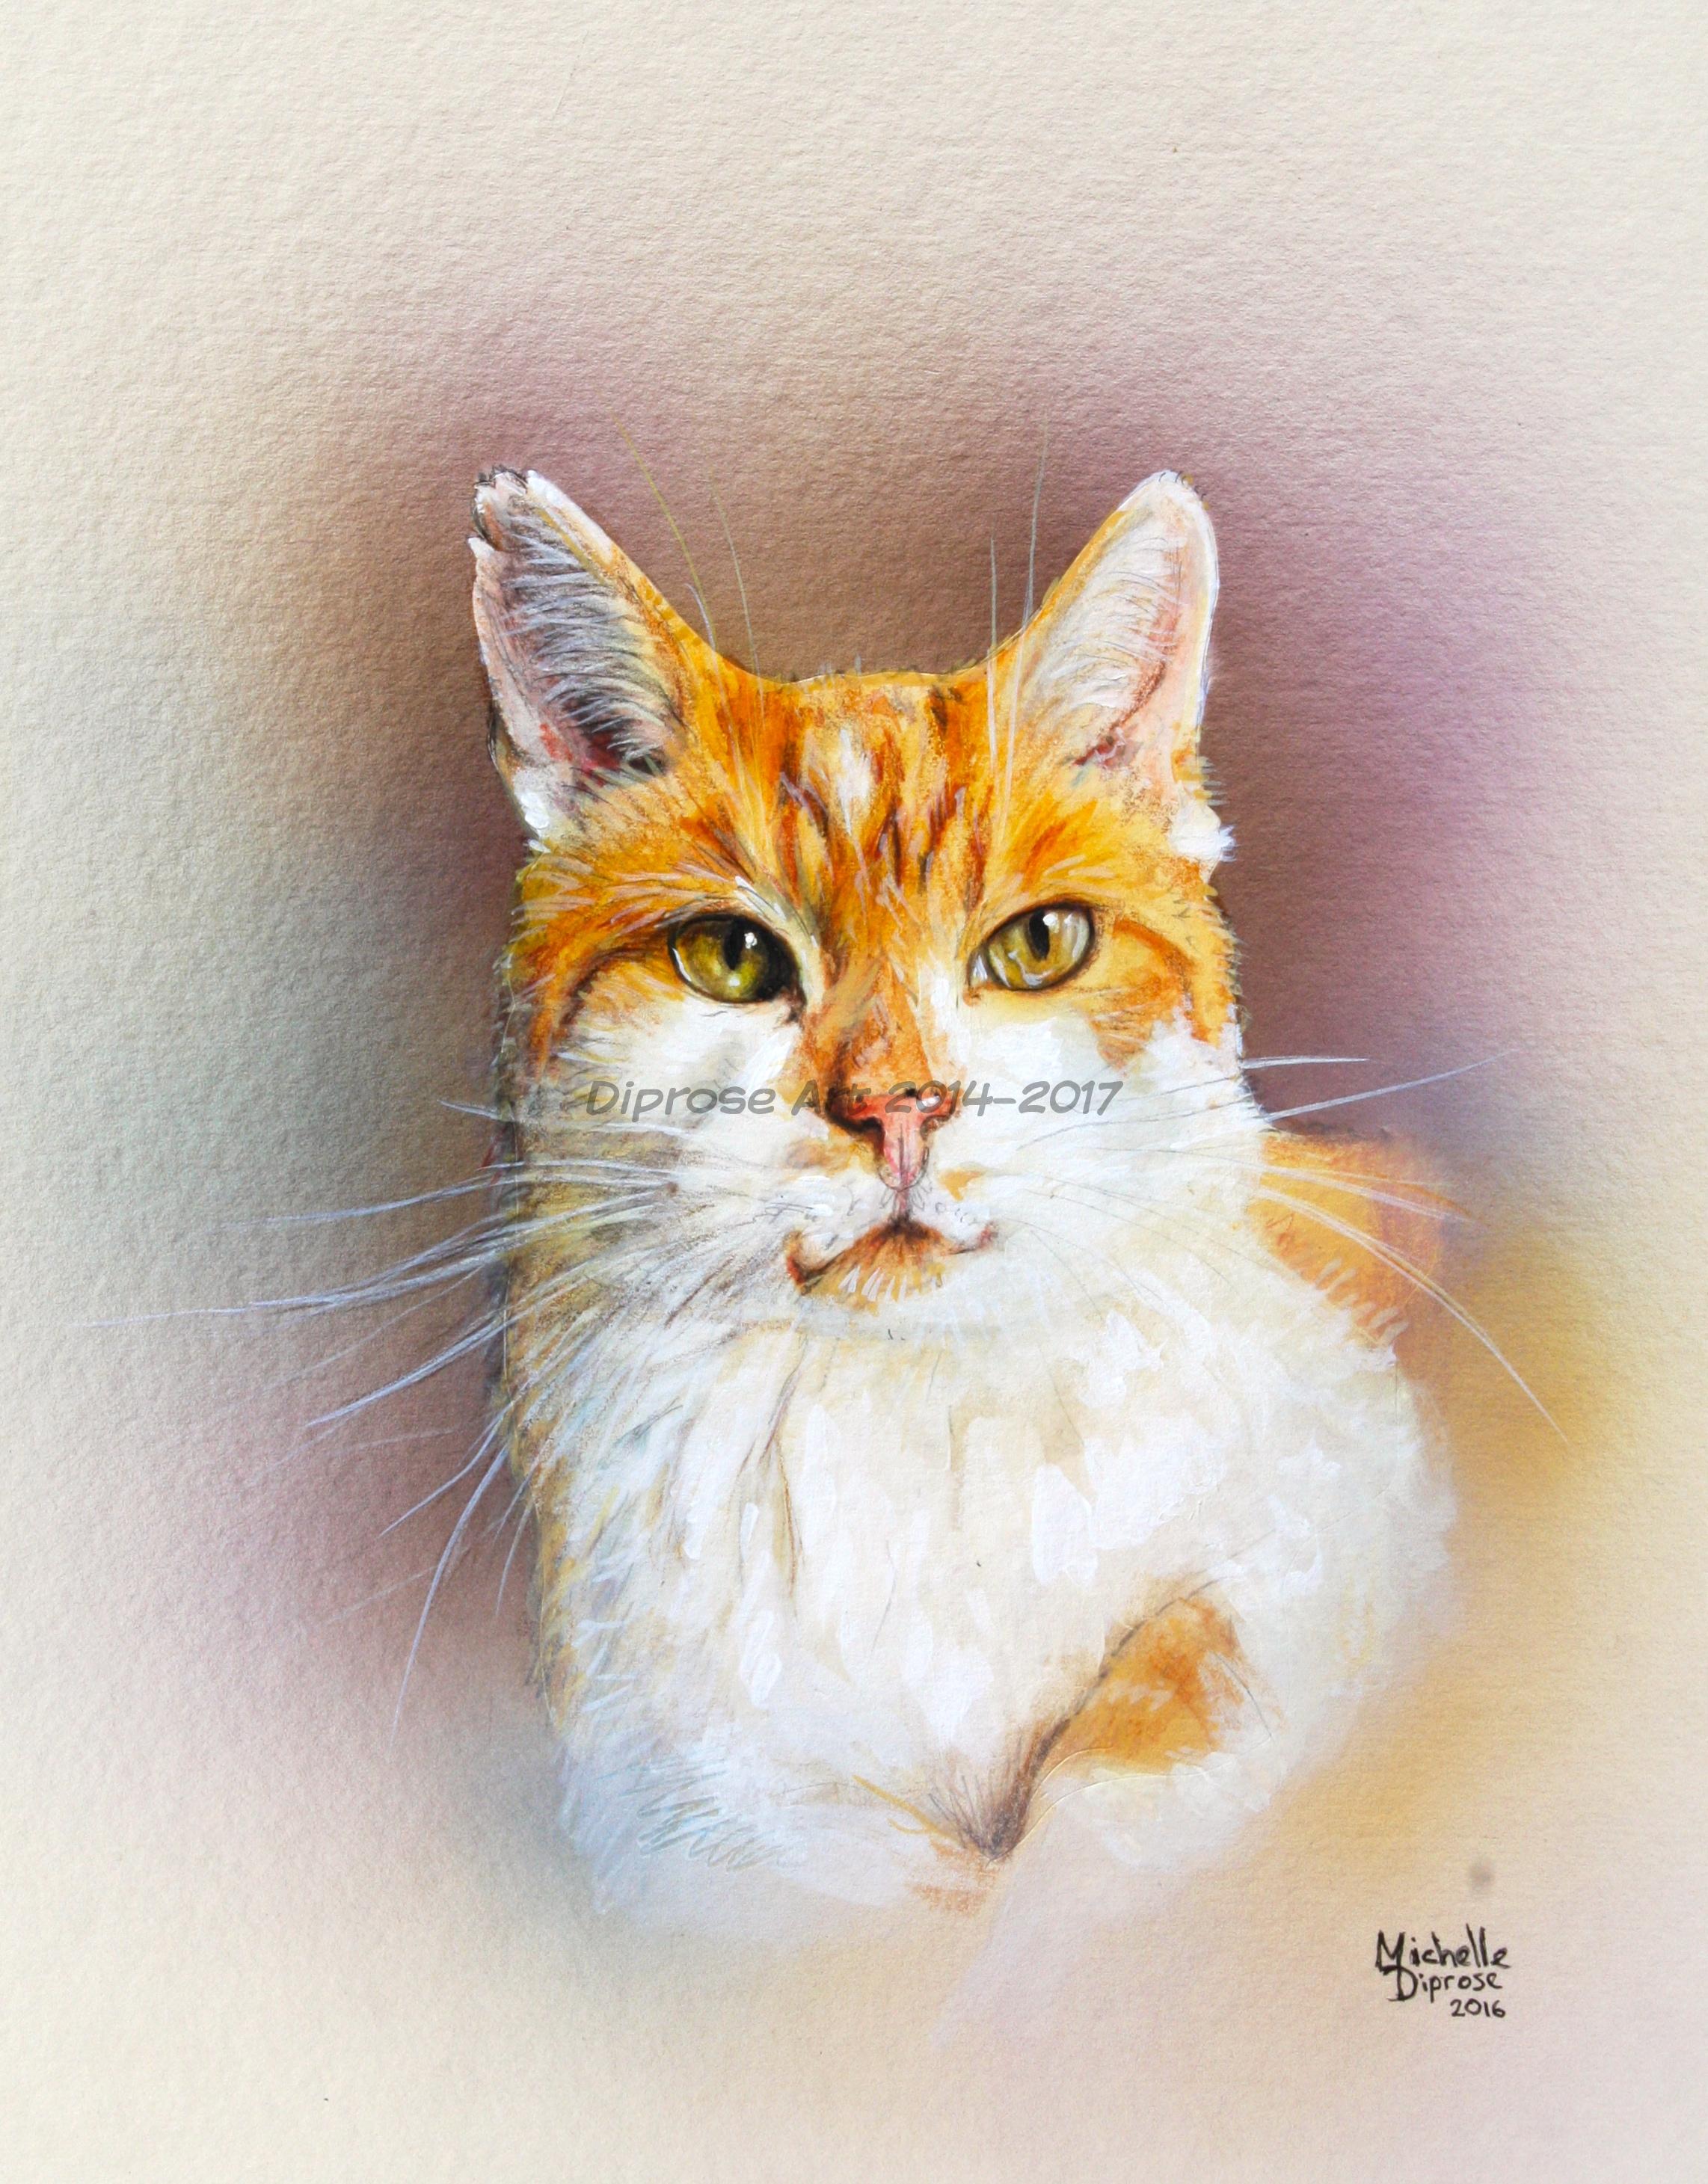 Acrylics on board - approx A4 - pet cat portrait - I enjoy painting animals as they truly are - scars and all - as they tell their story.